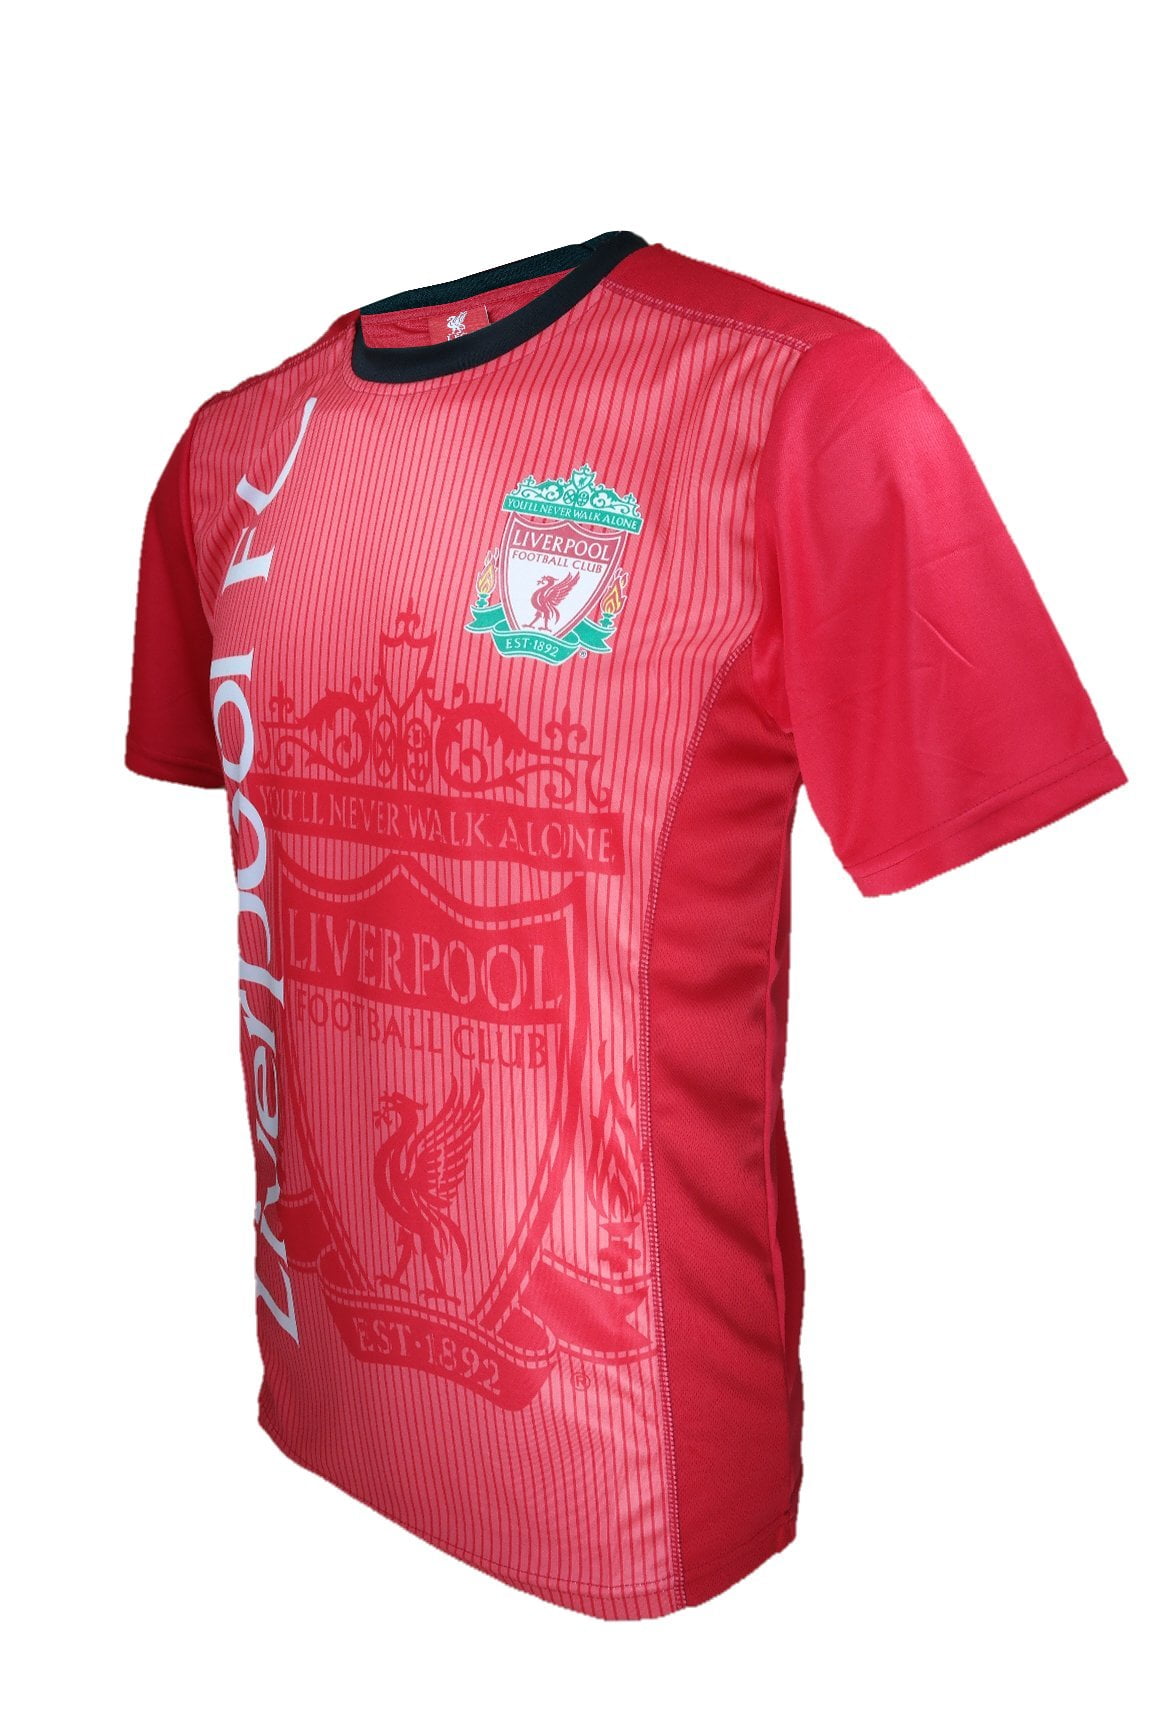 Liverpool F.C Soccer Official Adult Soccer Training  Jersey J008 XL 